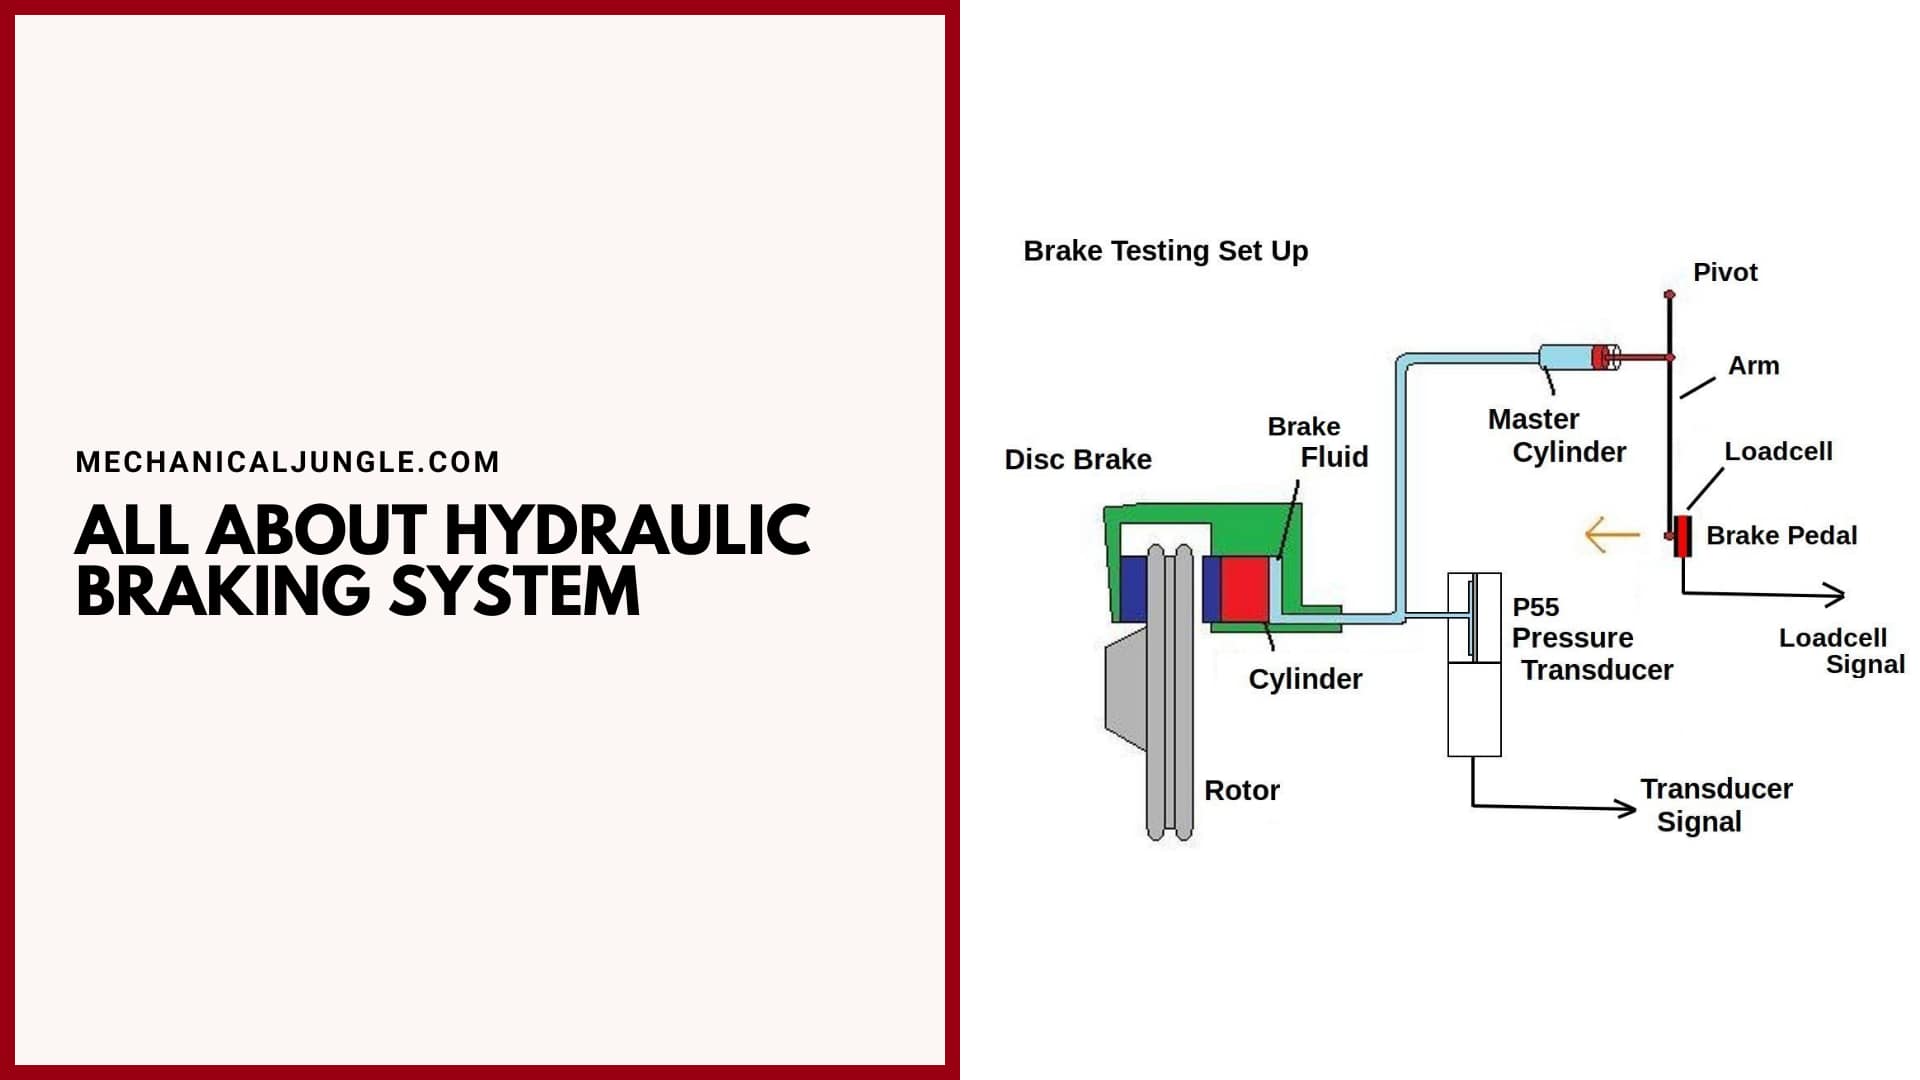 All About Hydraulic Braking System